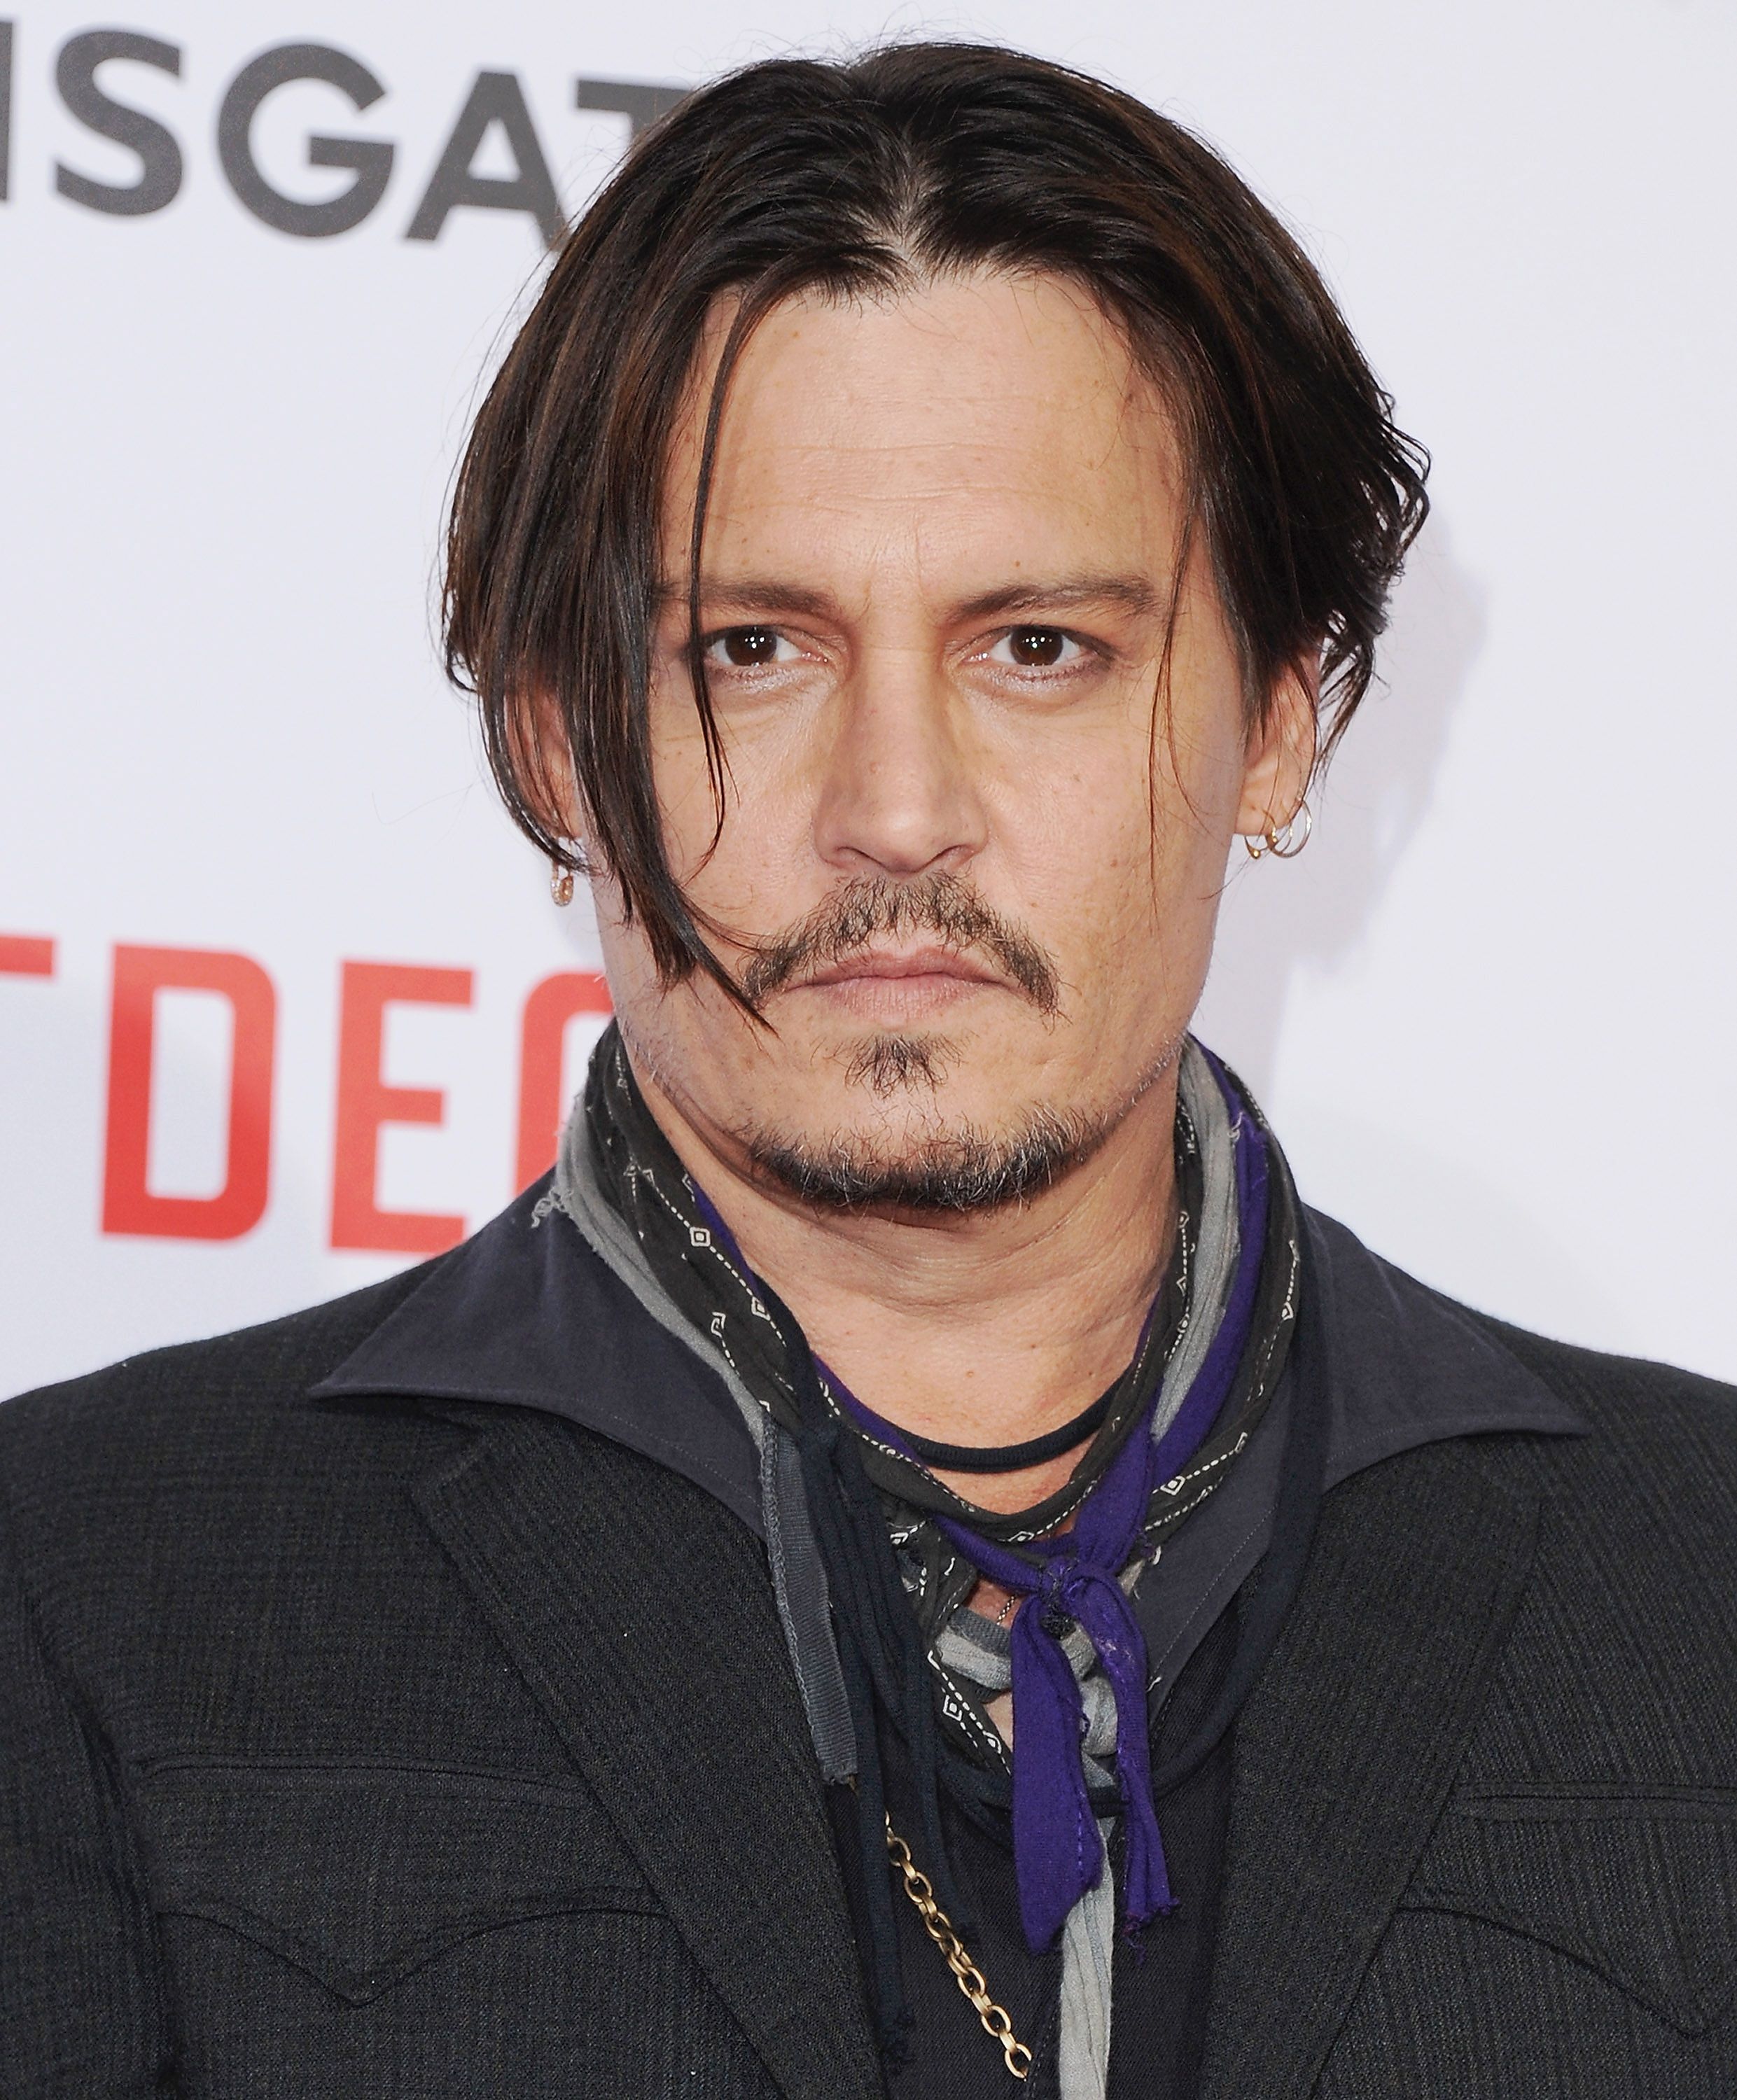 Johnny Depp's Career Is Over After Losing Libel Case, Experts Say